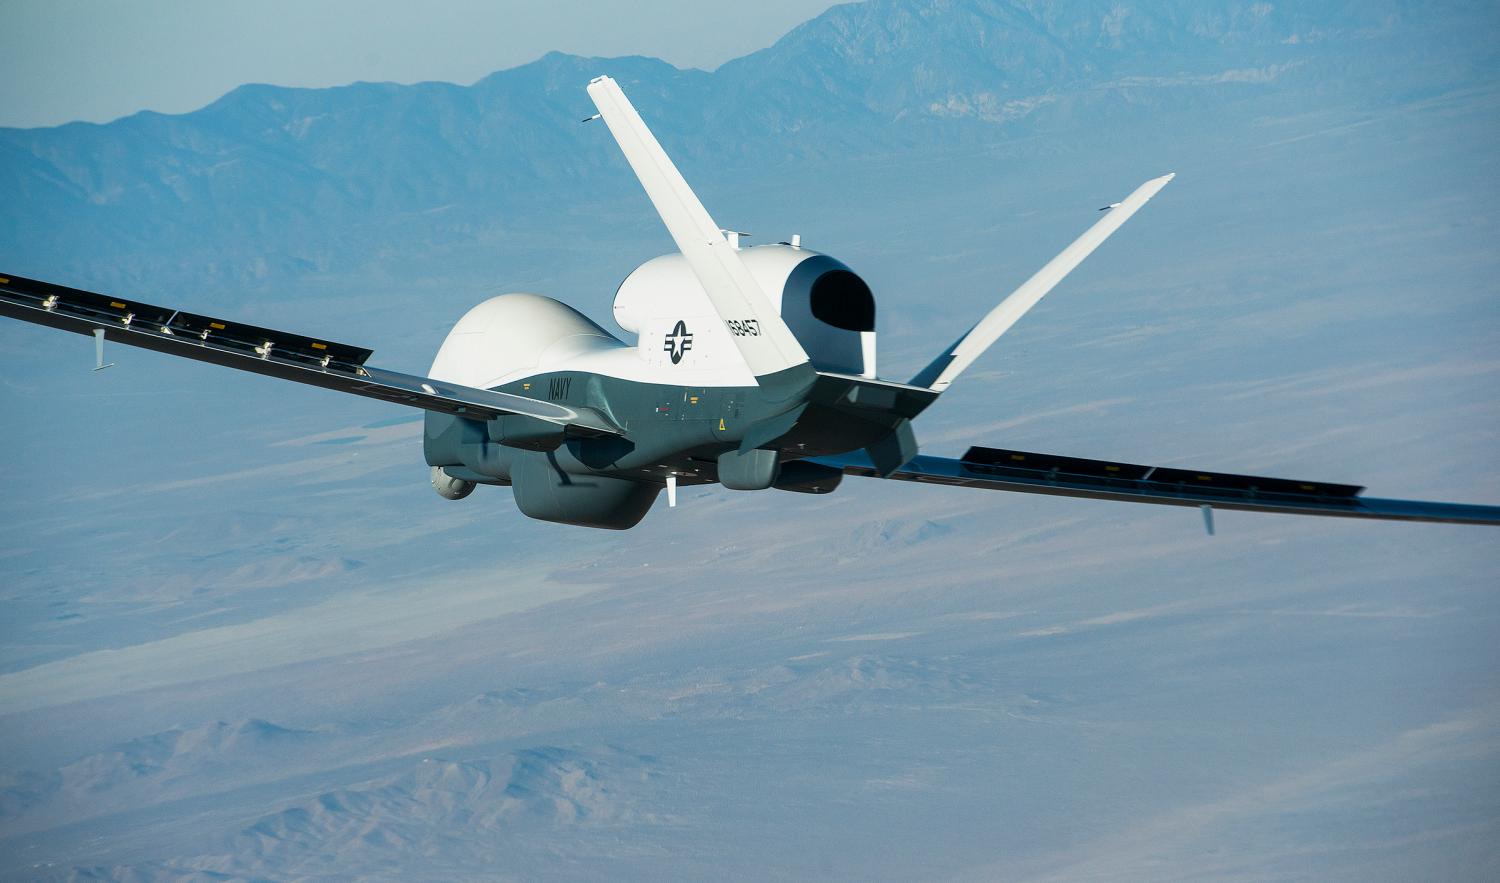 Handout of the Triton unmanned aircraft system completing its first flight from Northrop Grumman manufacturing facility in Palmdale